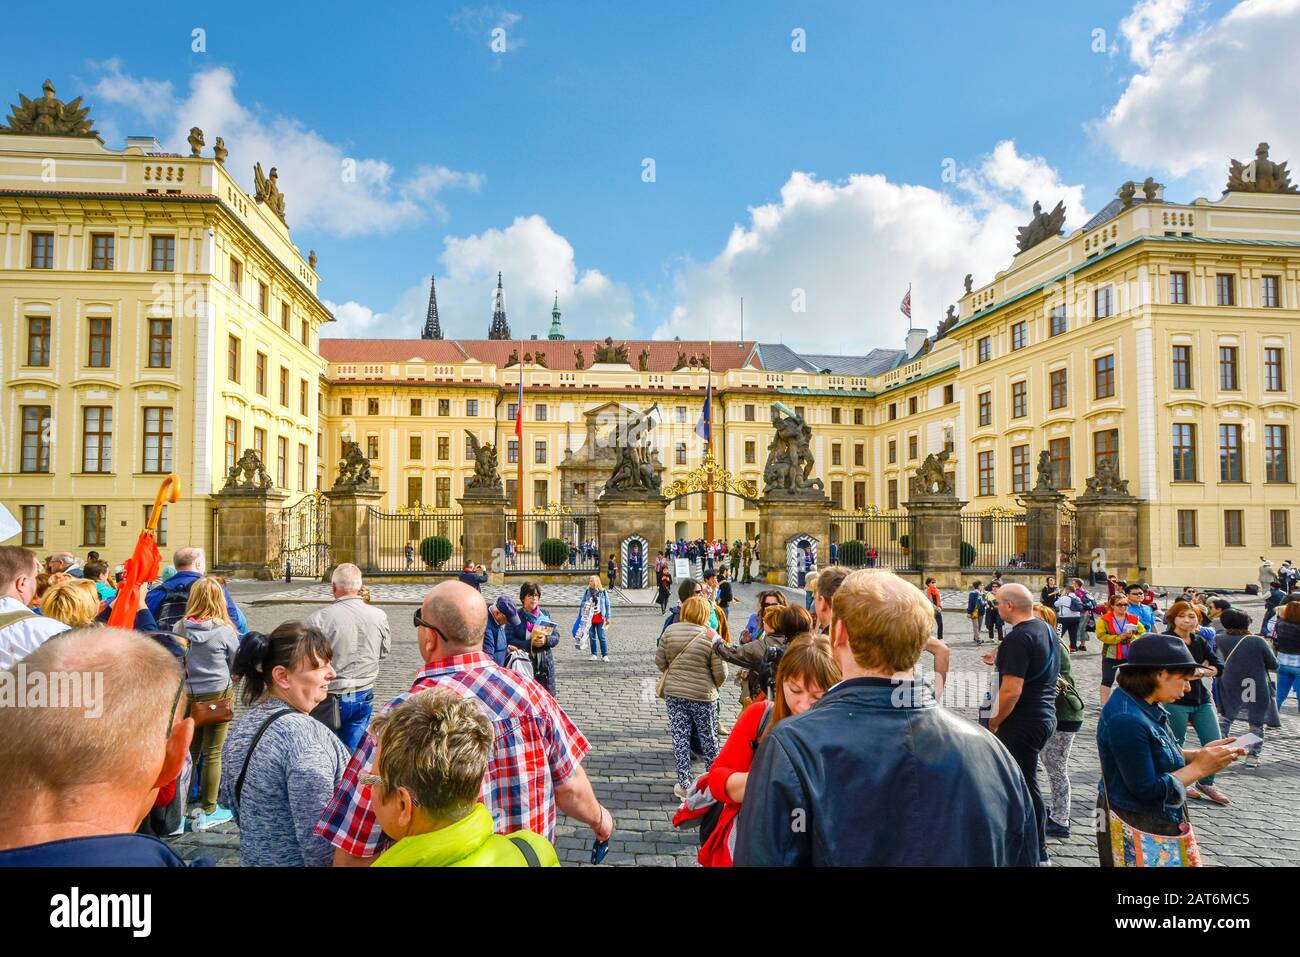 Tourists wait outside the courtyard of the Royal Palace for the changing of the guard at Prague Castlle Complex in Czechia. Stock Photo